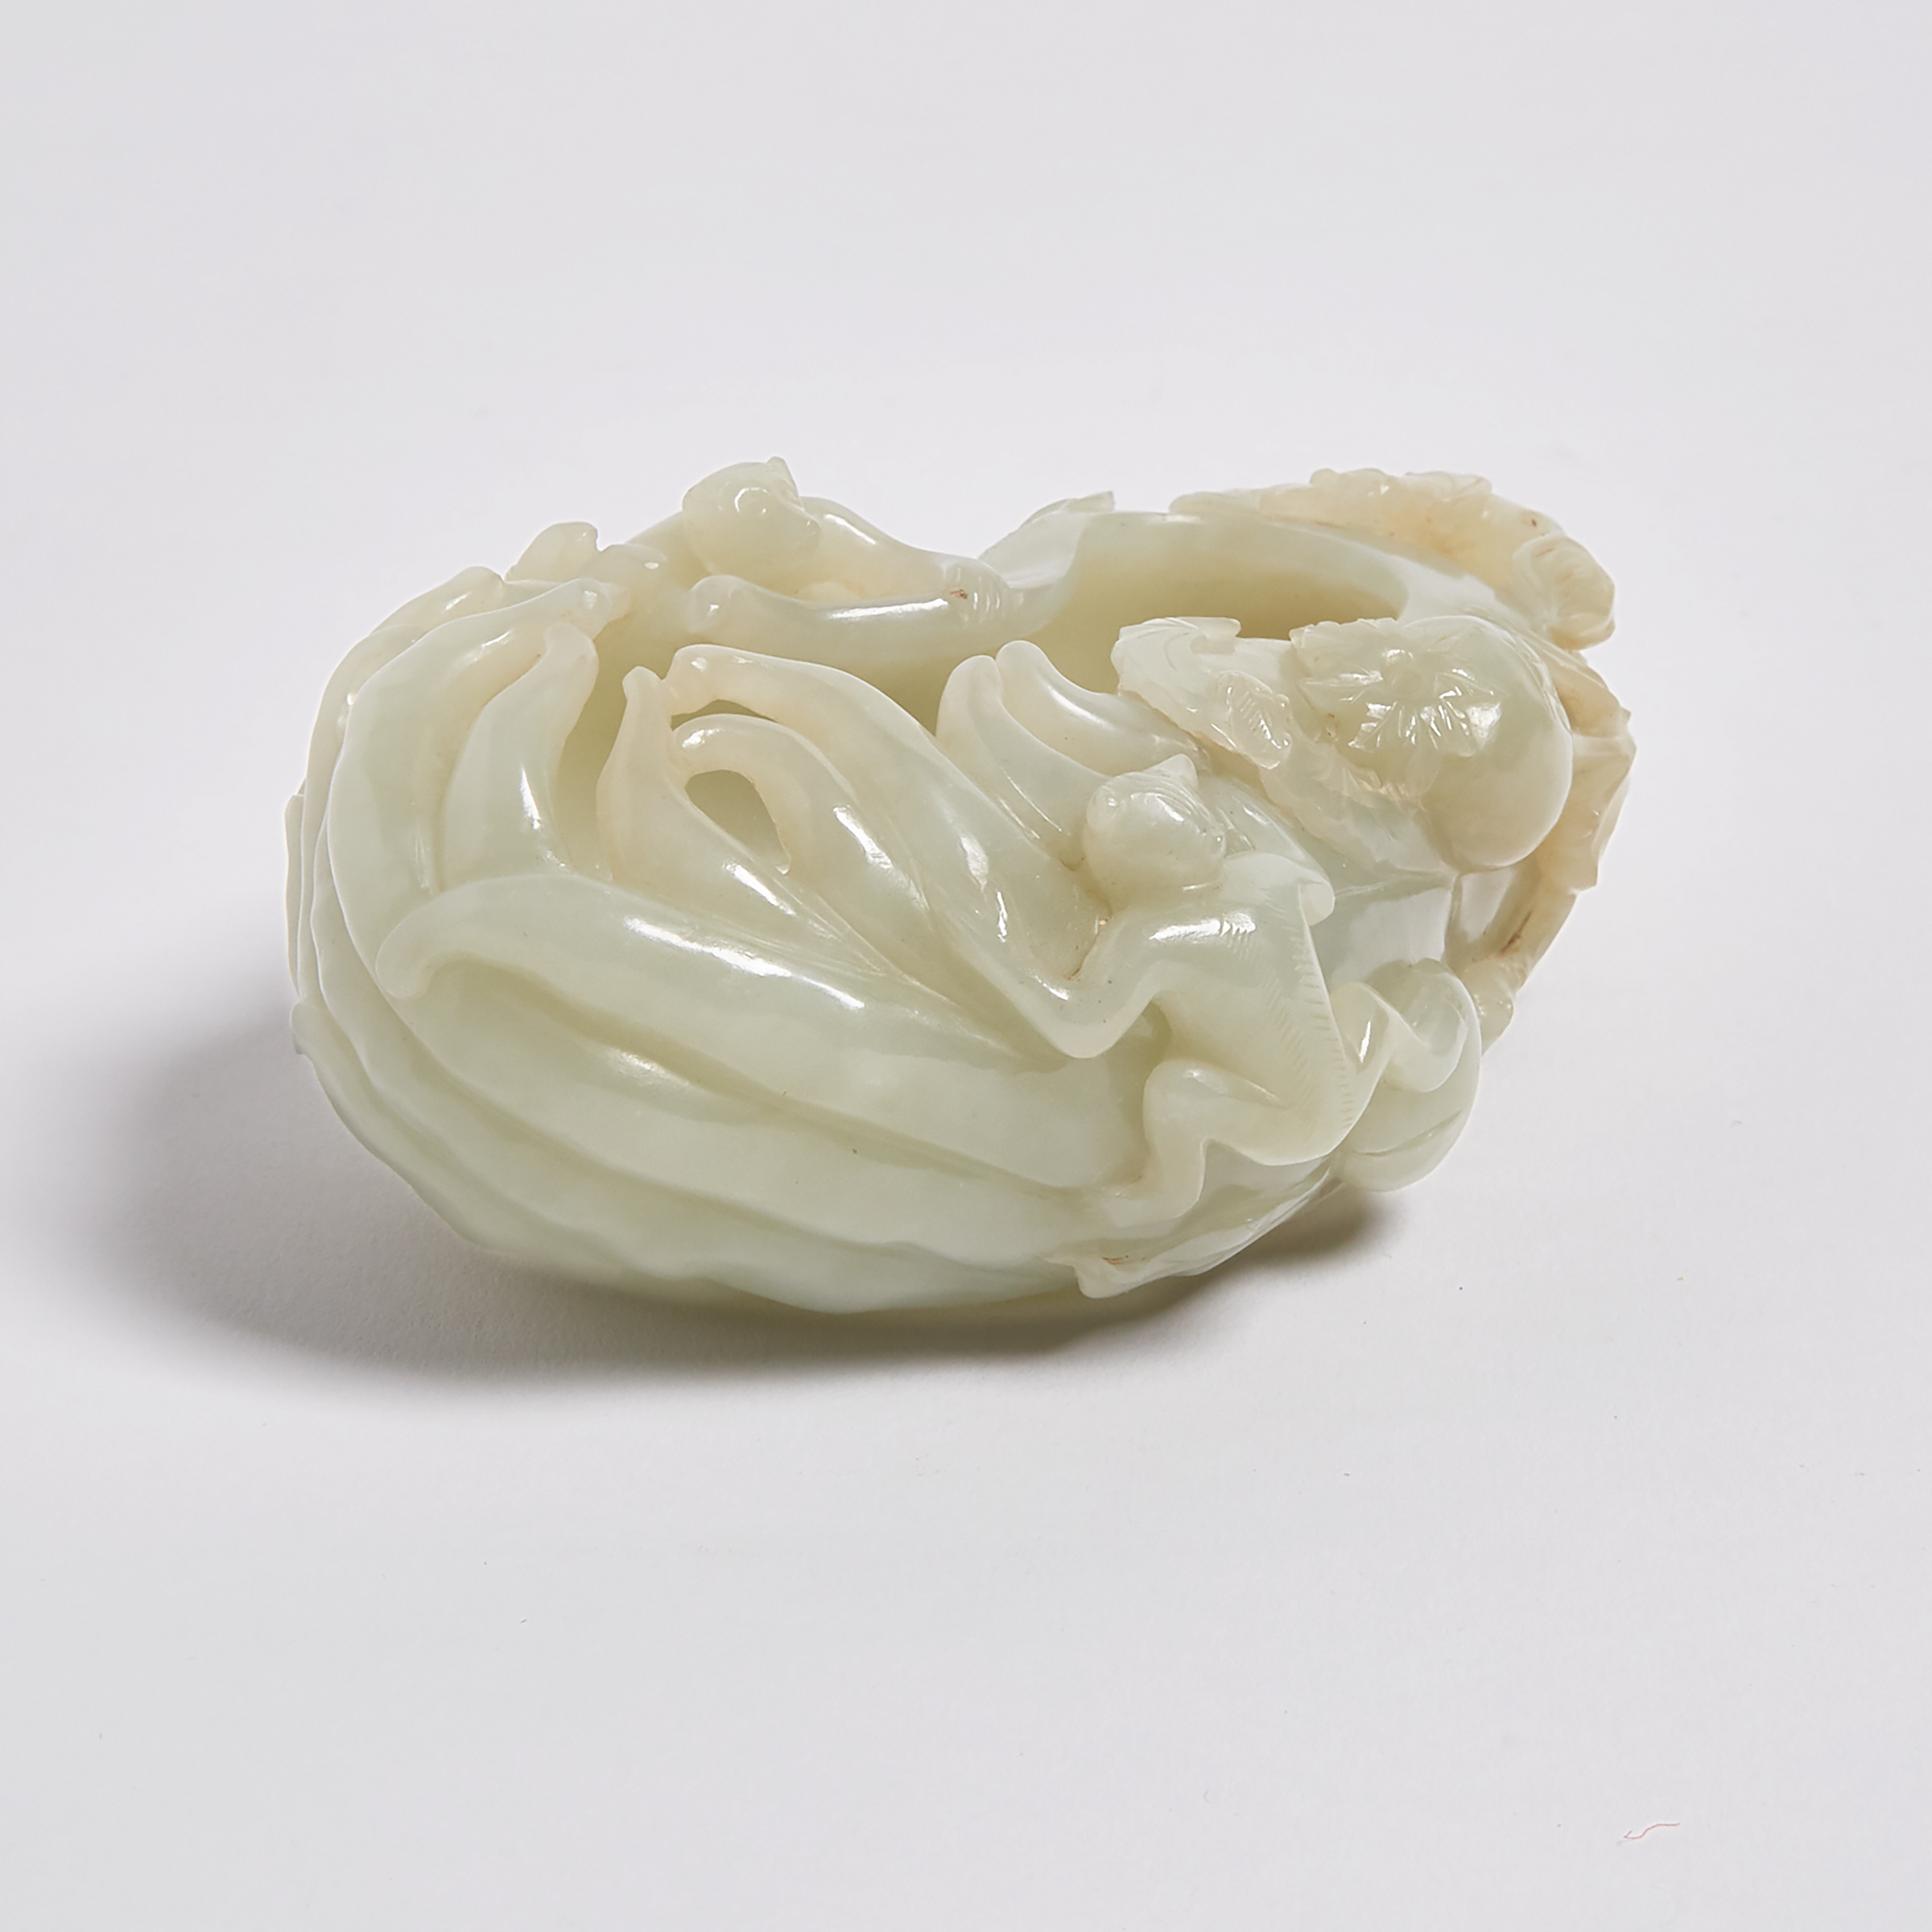 A Celadon Jade 'Buddha's Hand Citron and Monkeys' Washer, 18th/19th Century